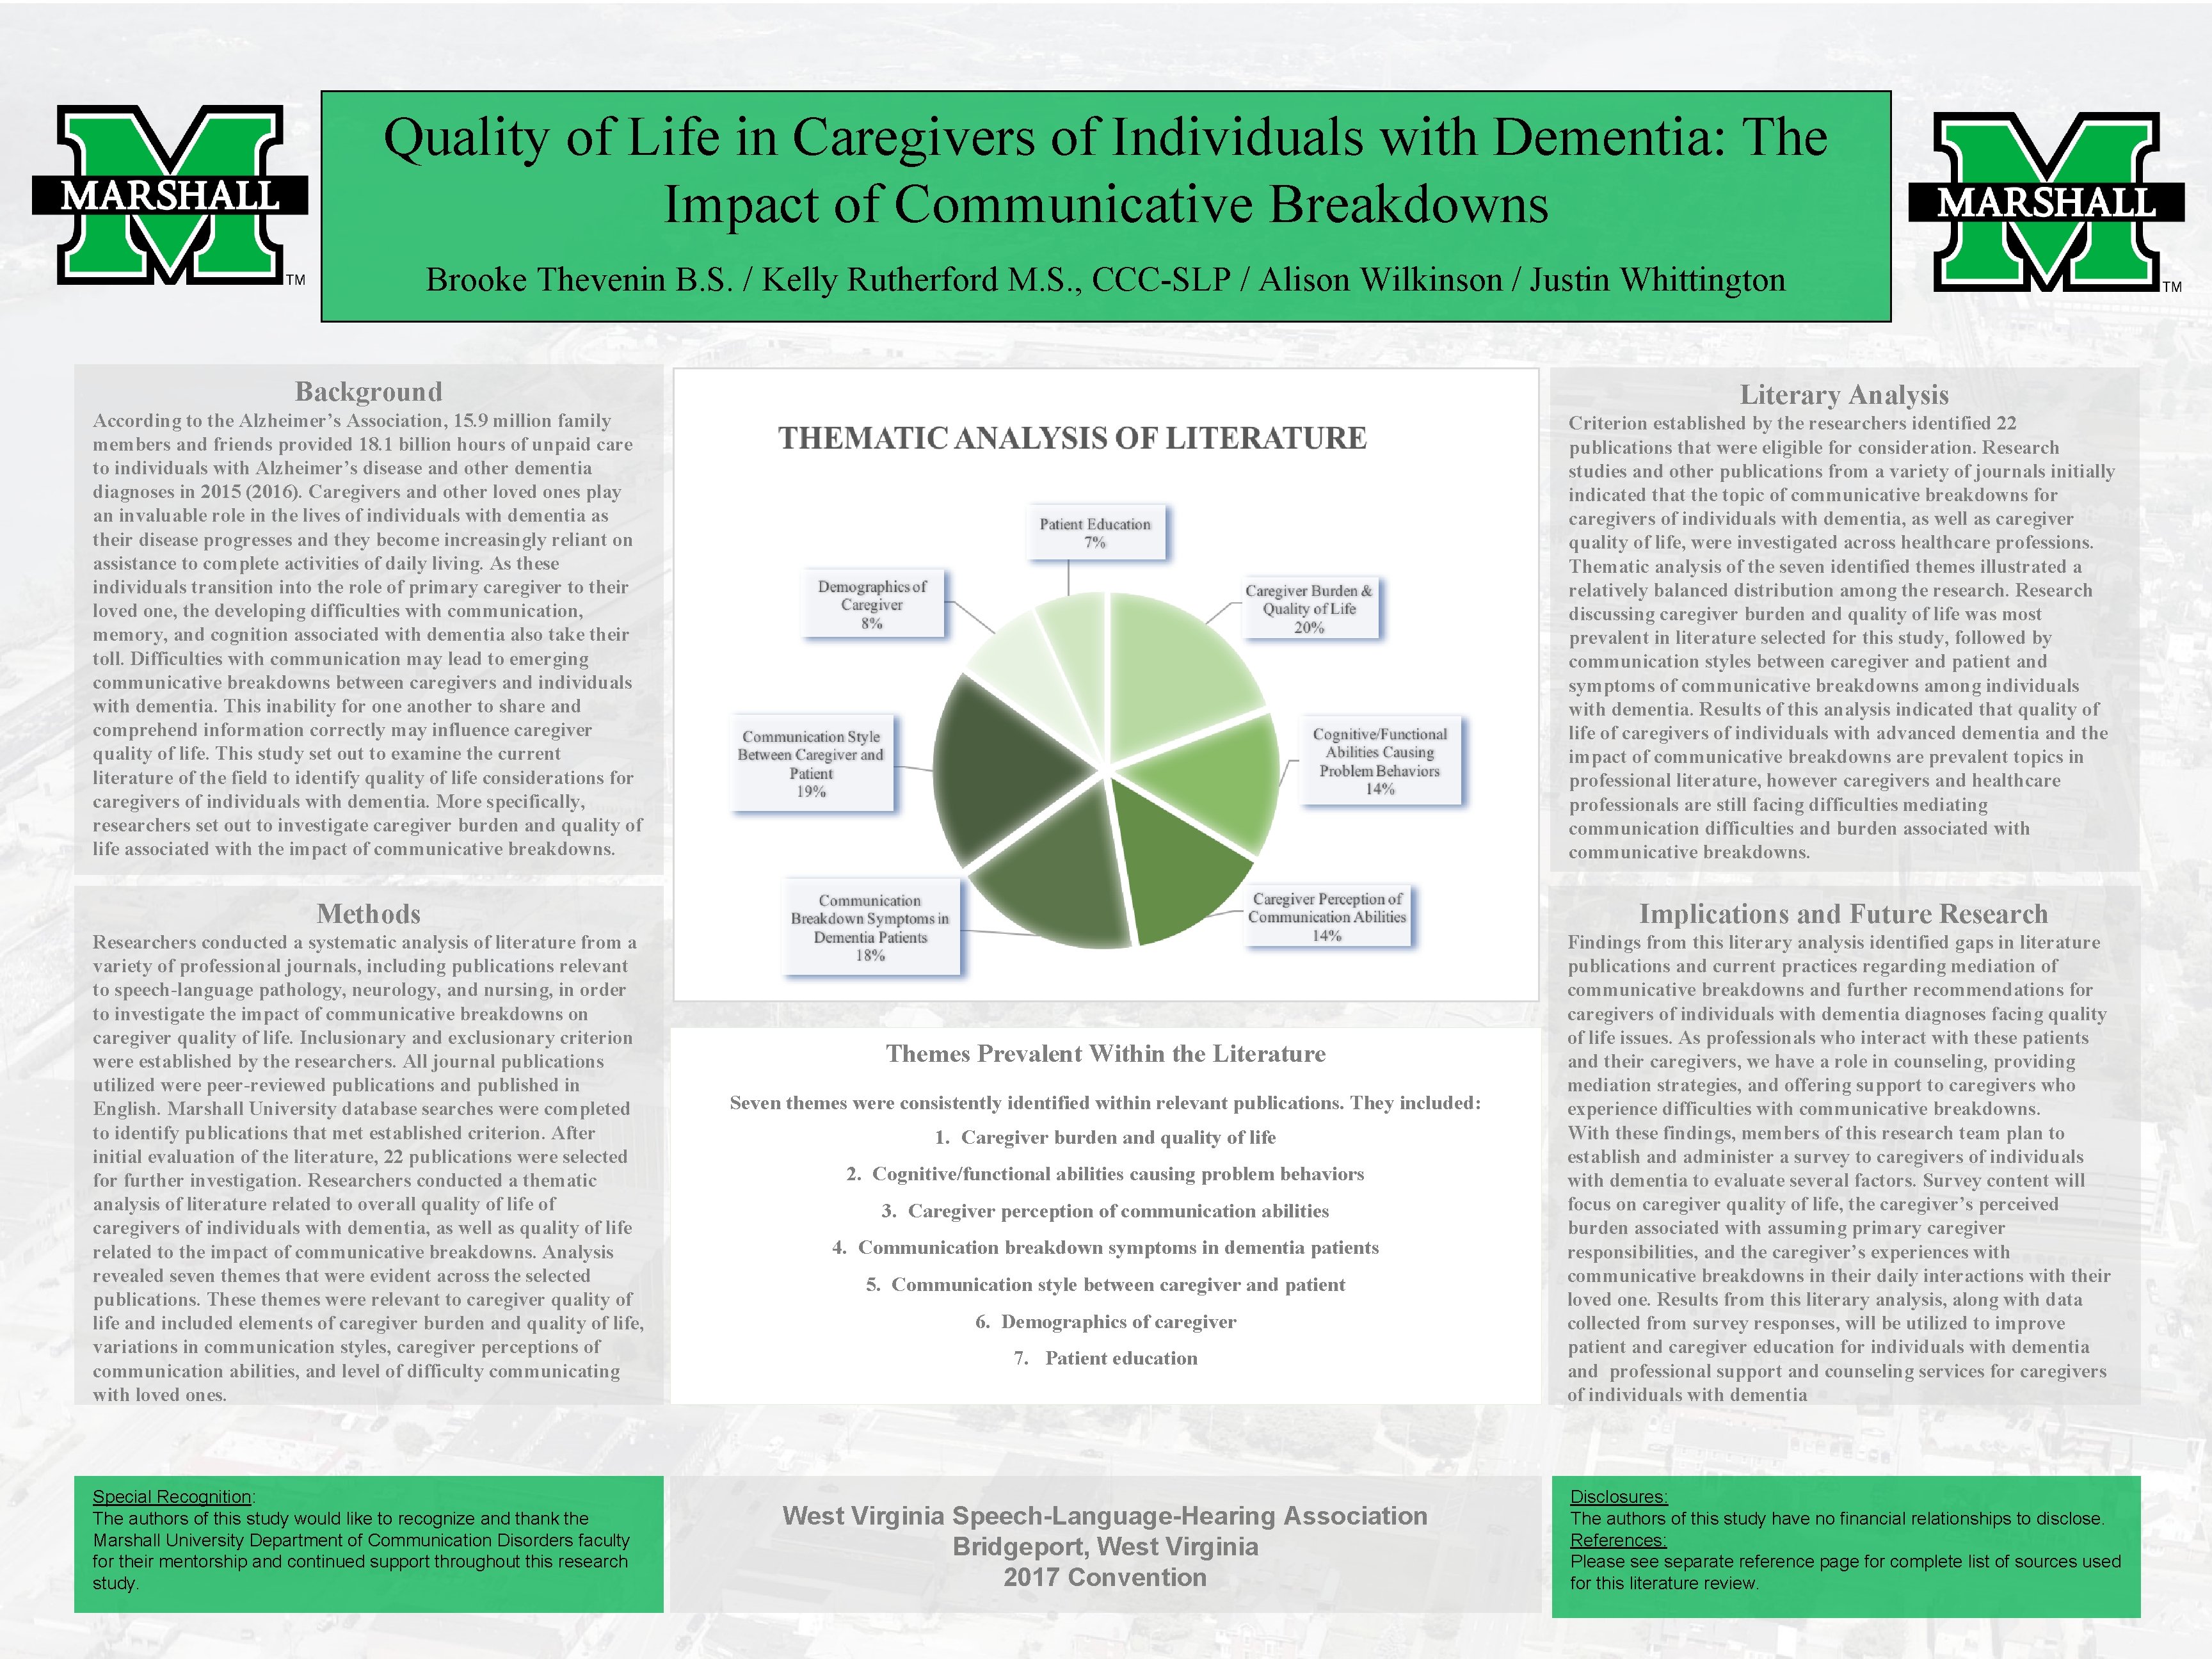 Quality of Life in Caregivers of Individuals with Dementia: The Impact of Communicative Breakdowns